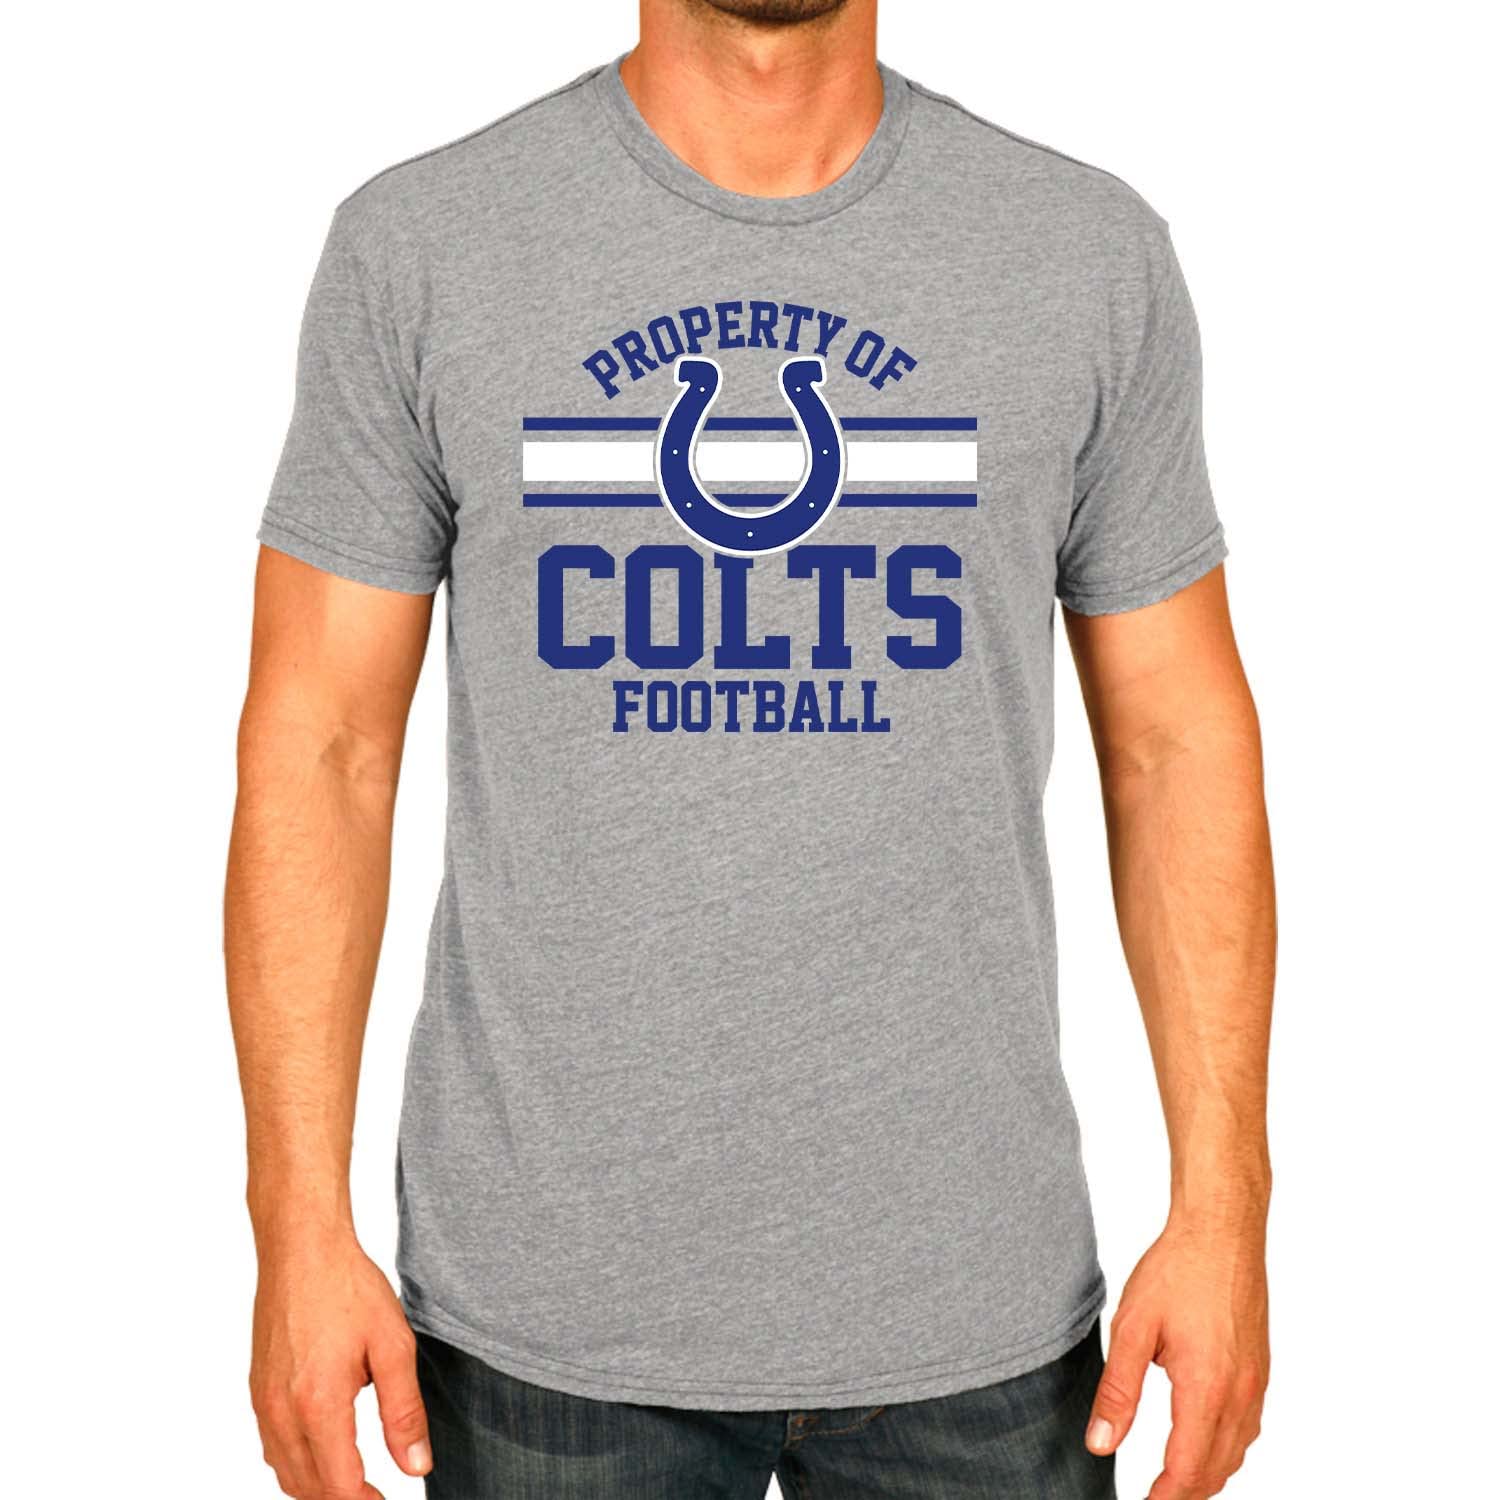 Team Fan Apparel NFL Adult Property of T-Shirt - Cotton & Polyester - Show Your Team Pride with Ultimate Comfort and Quality (In